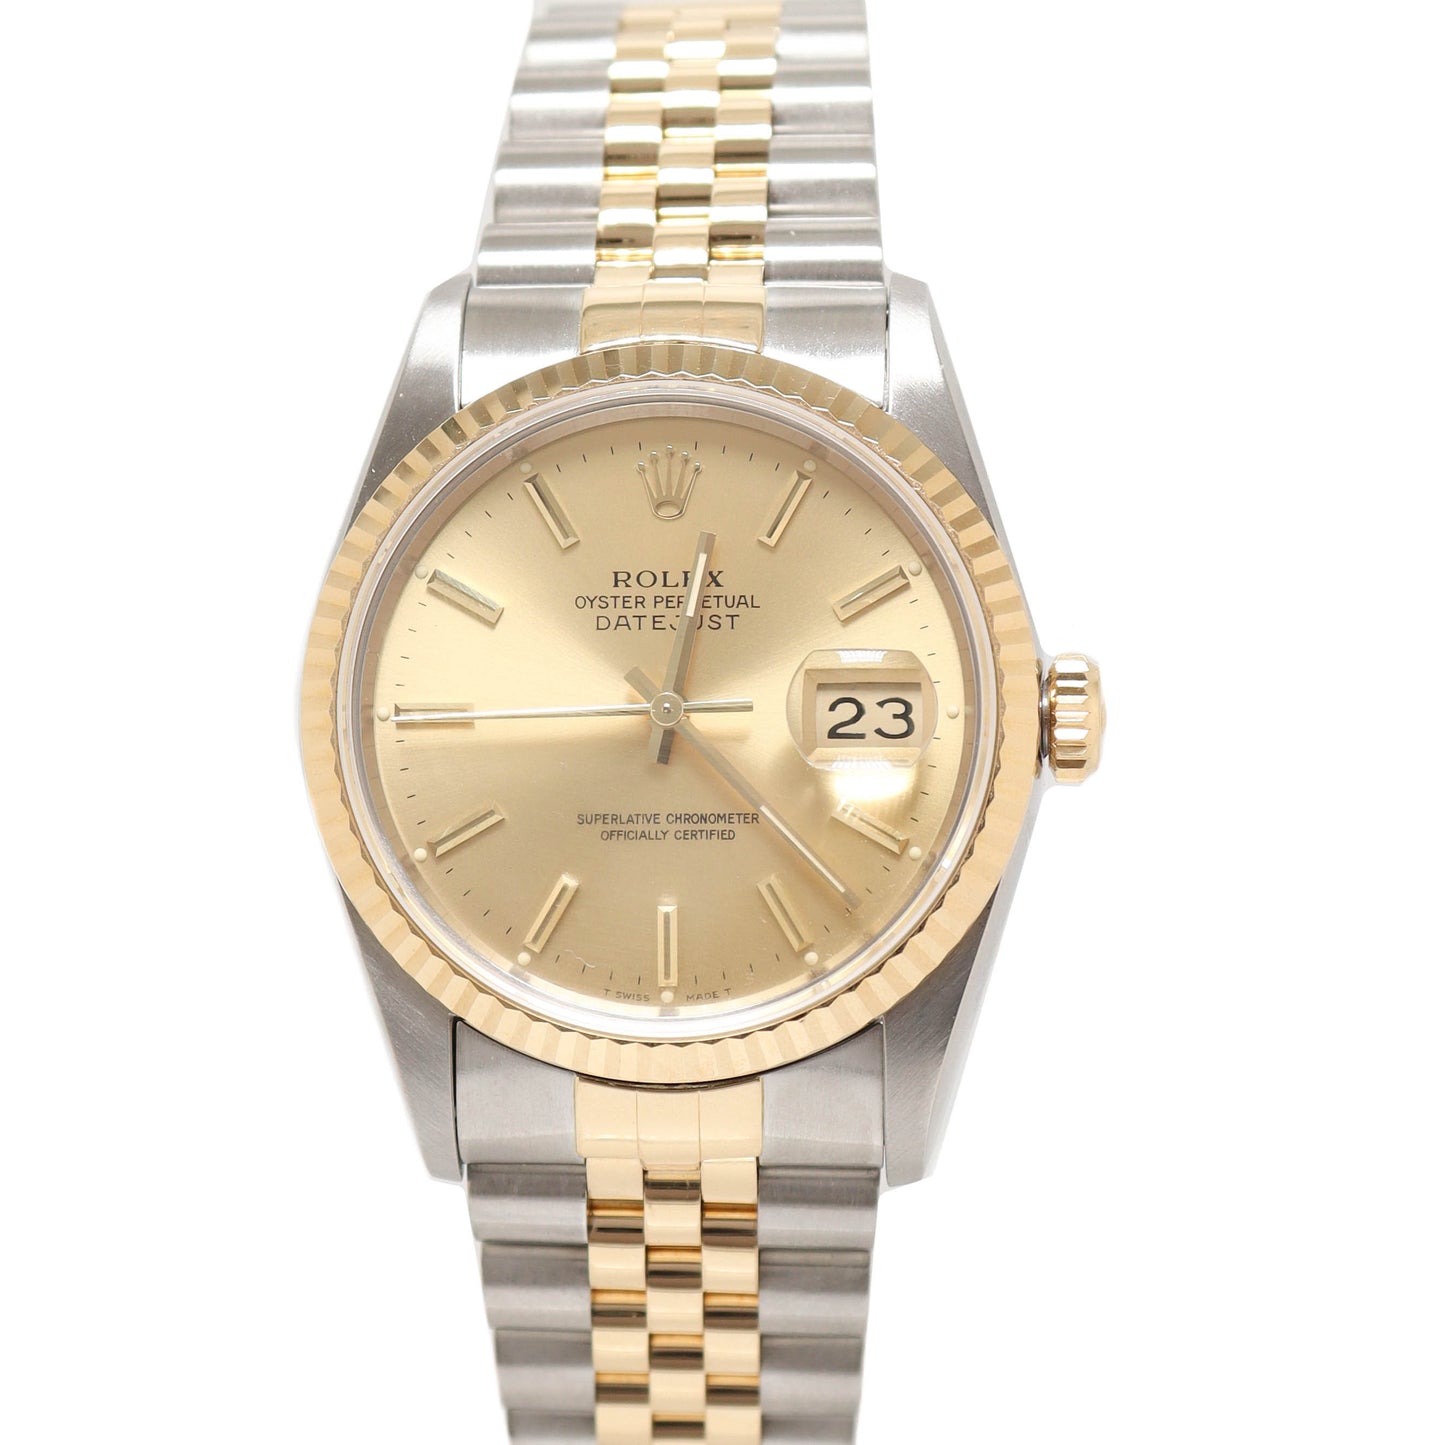 Rolex Datejust Two Tone Yellow Gold & Steel 36mm Champagne Stick Dial Watch  Reference # 16233 - Happy Jewelers Fine Jewelry Lifetime Warranty